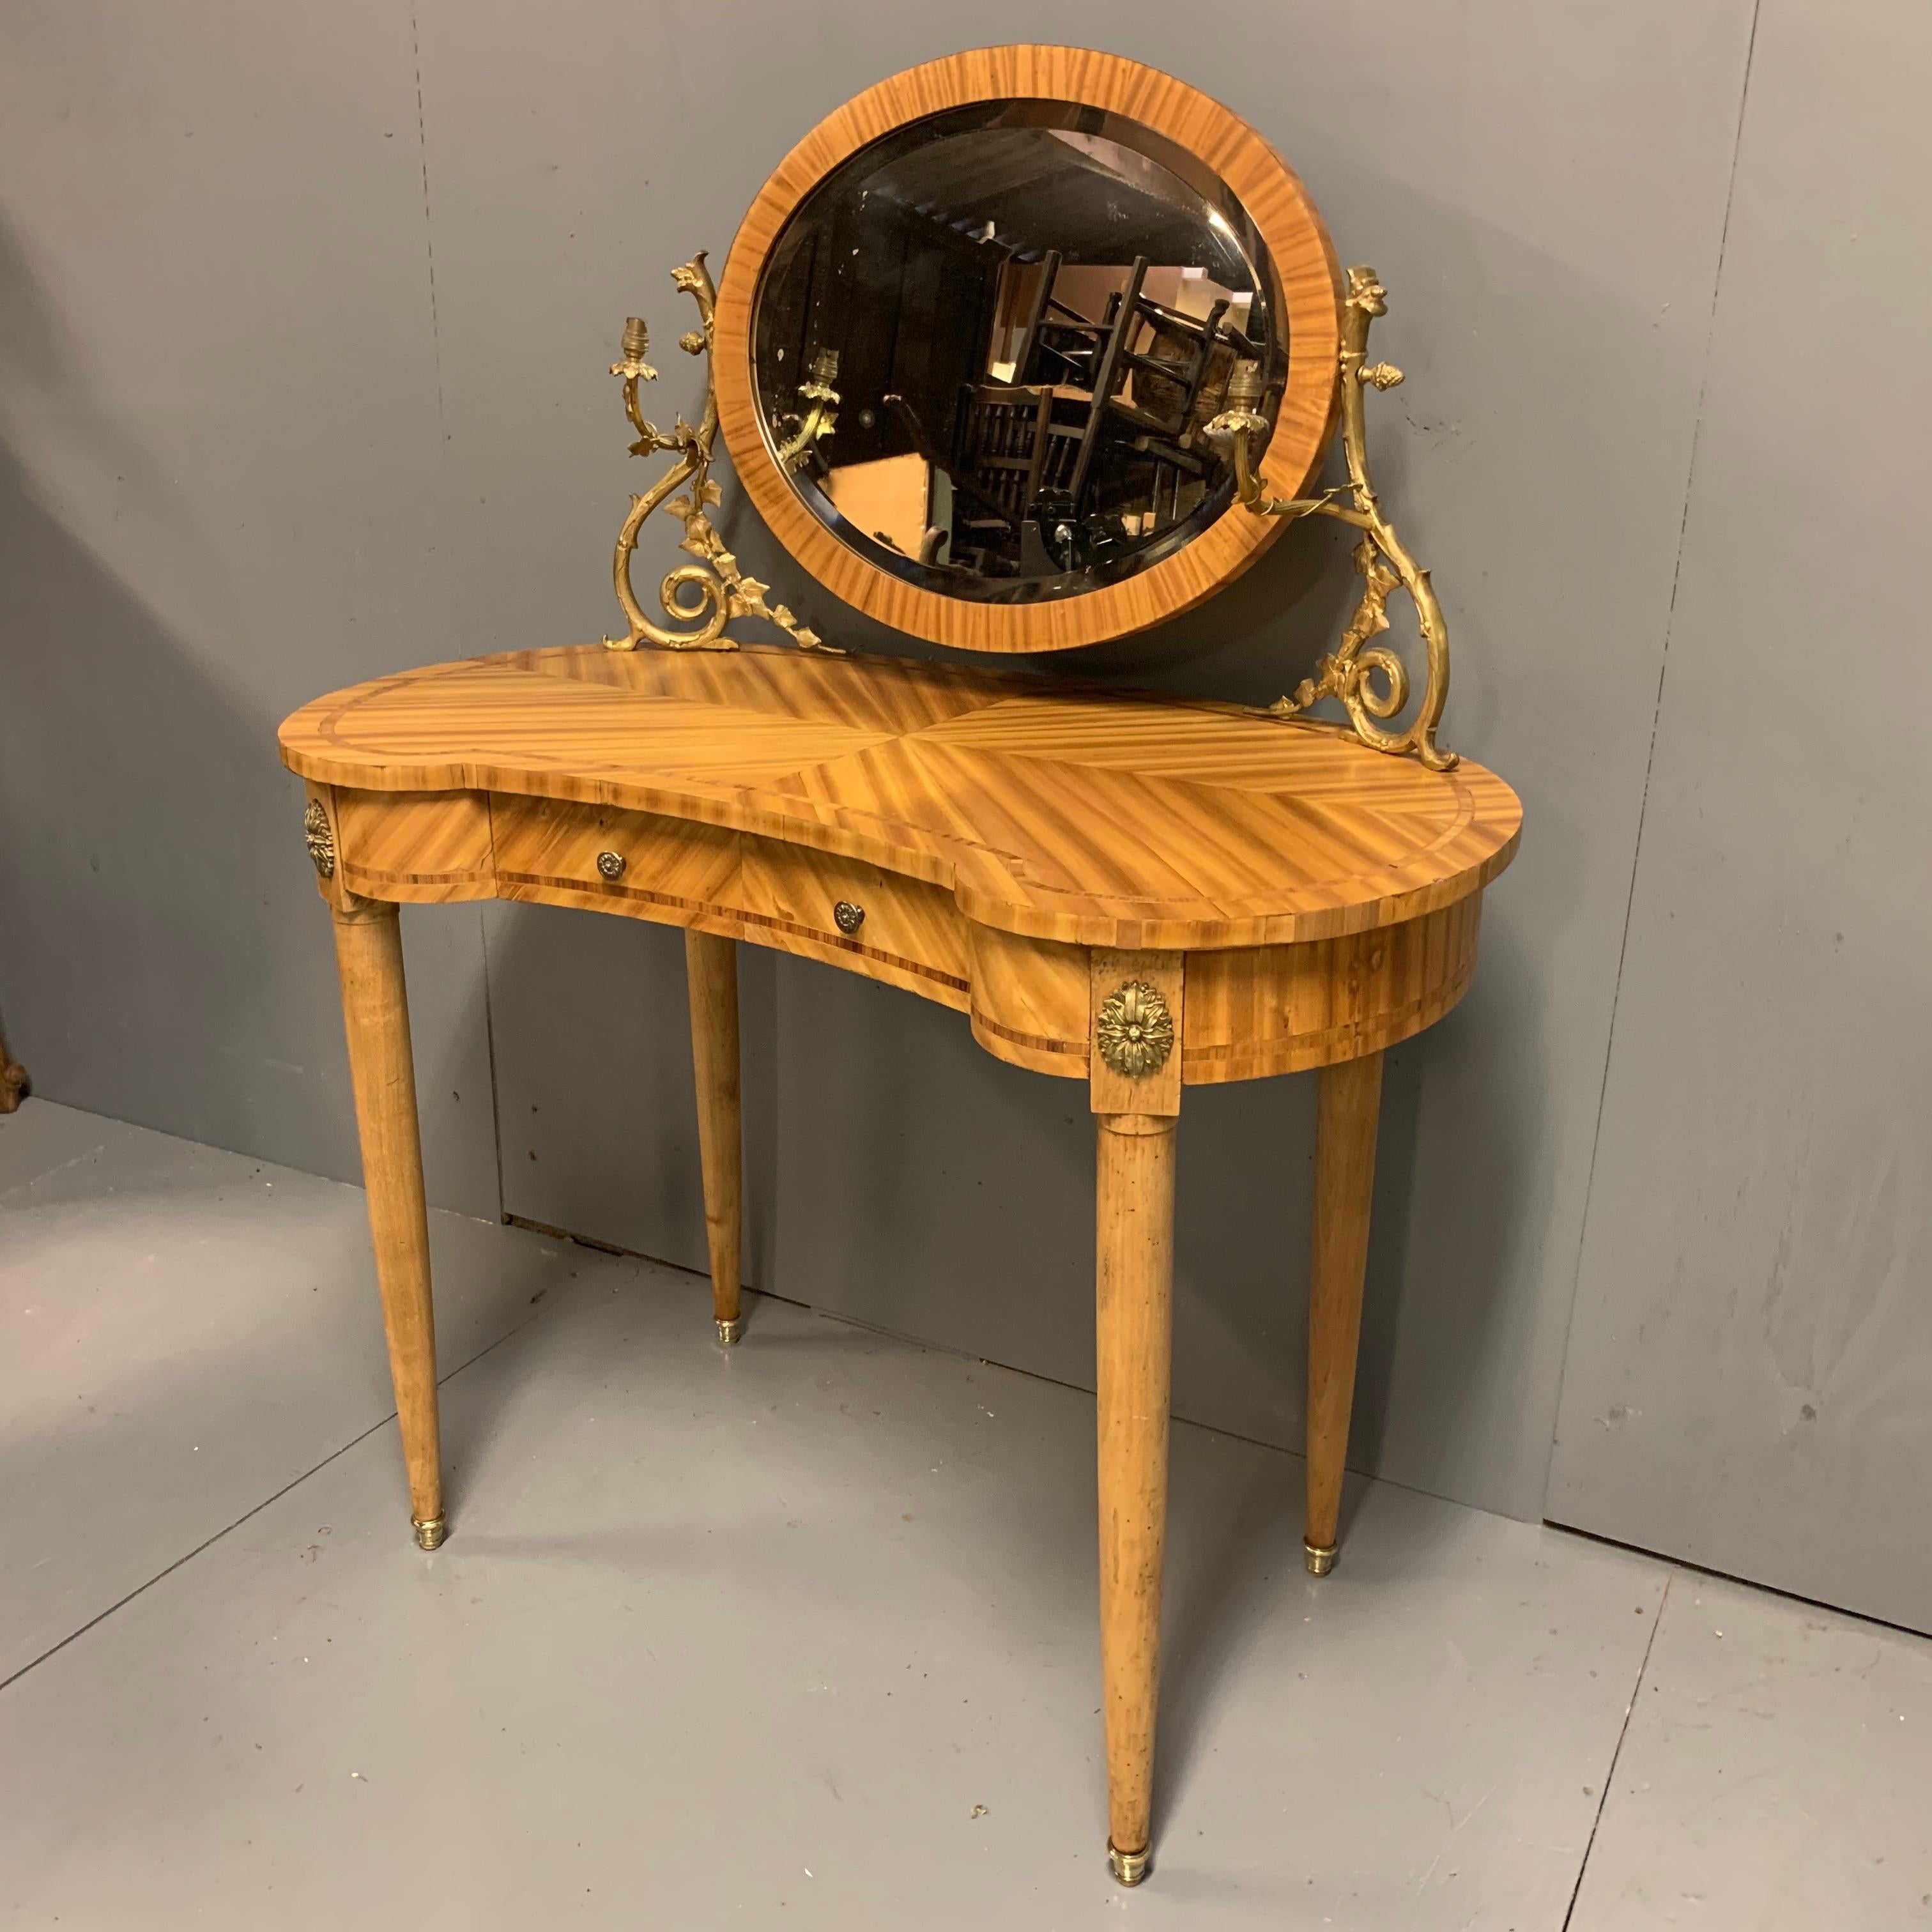 Antique French Bleached Mahogany Kidney Shape Dressing Table with Sconces (Mahagoni) im Angebot